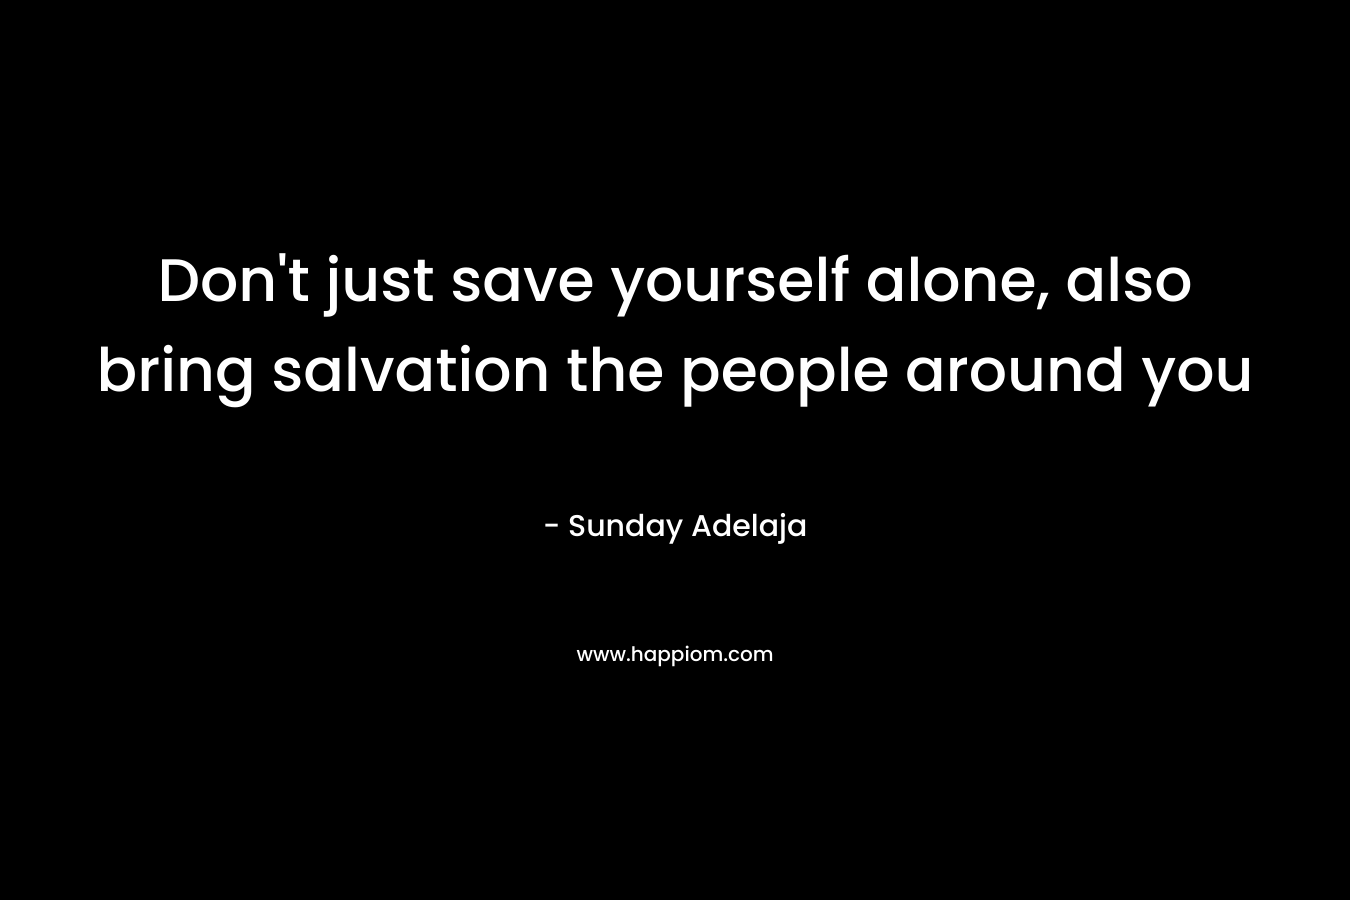 Don't just save yourself alone, also bring salvation the people around you